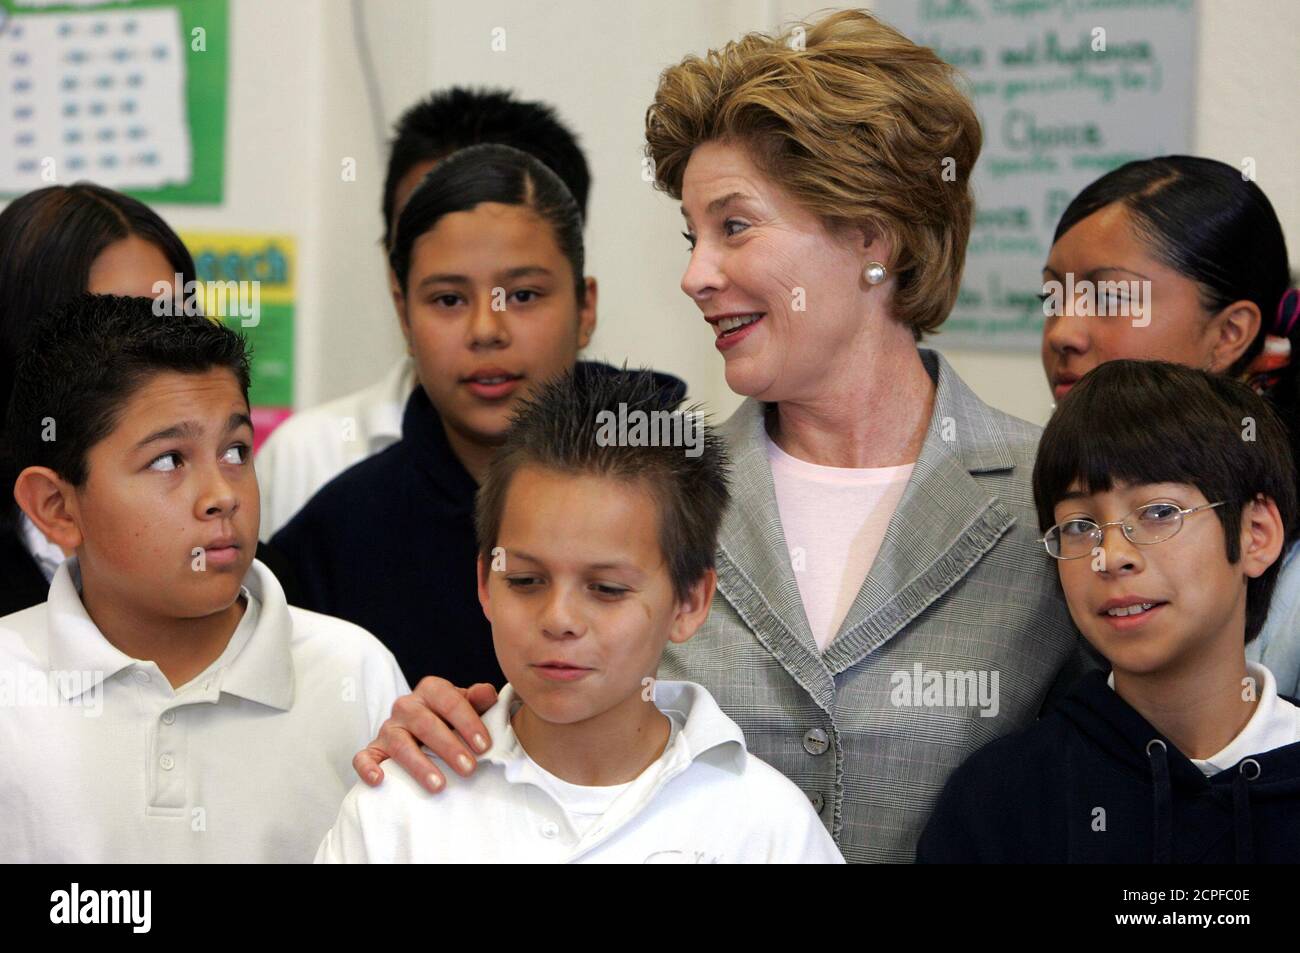 U.S. first lady Laura Bush poses with students during her visit to language classes at Sun Valley Middle School in Los Angeles, California April 27, 2005. REUTERS/Lucy Nicholson  LN Stock Photo